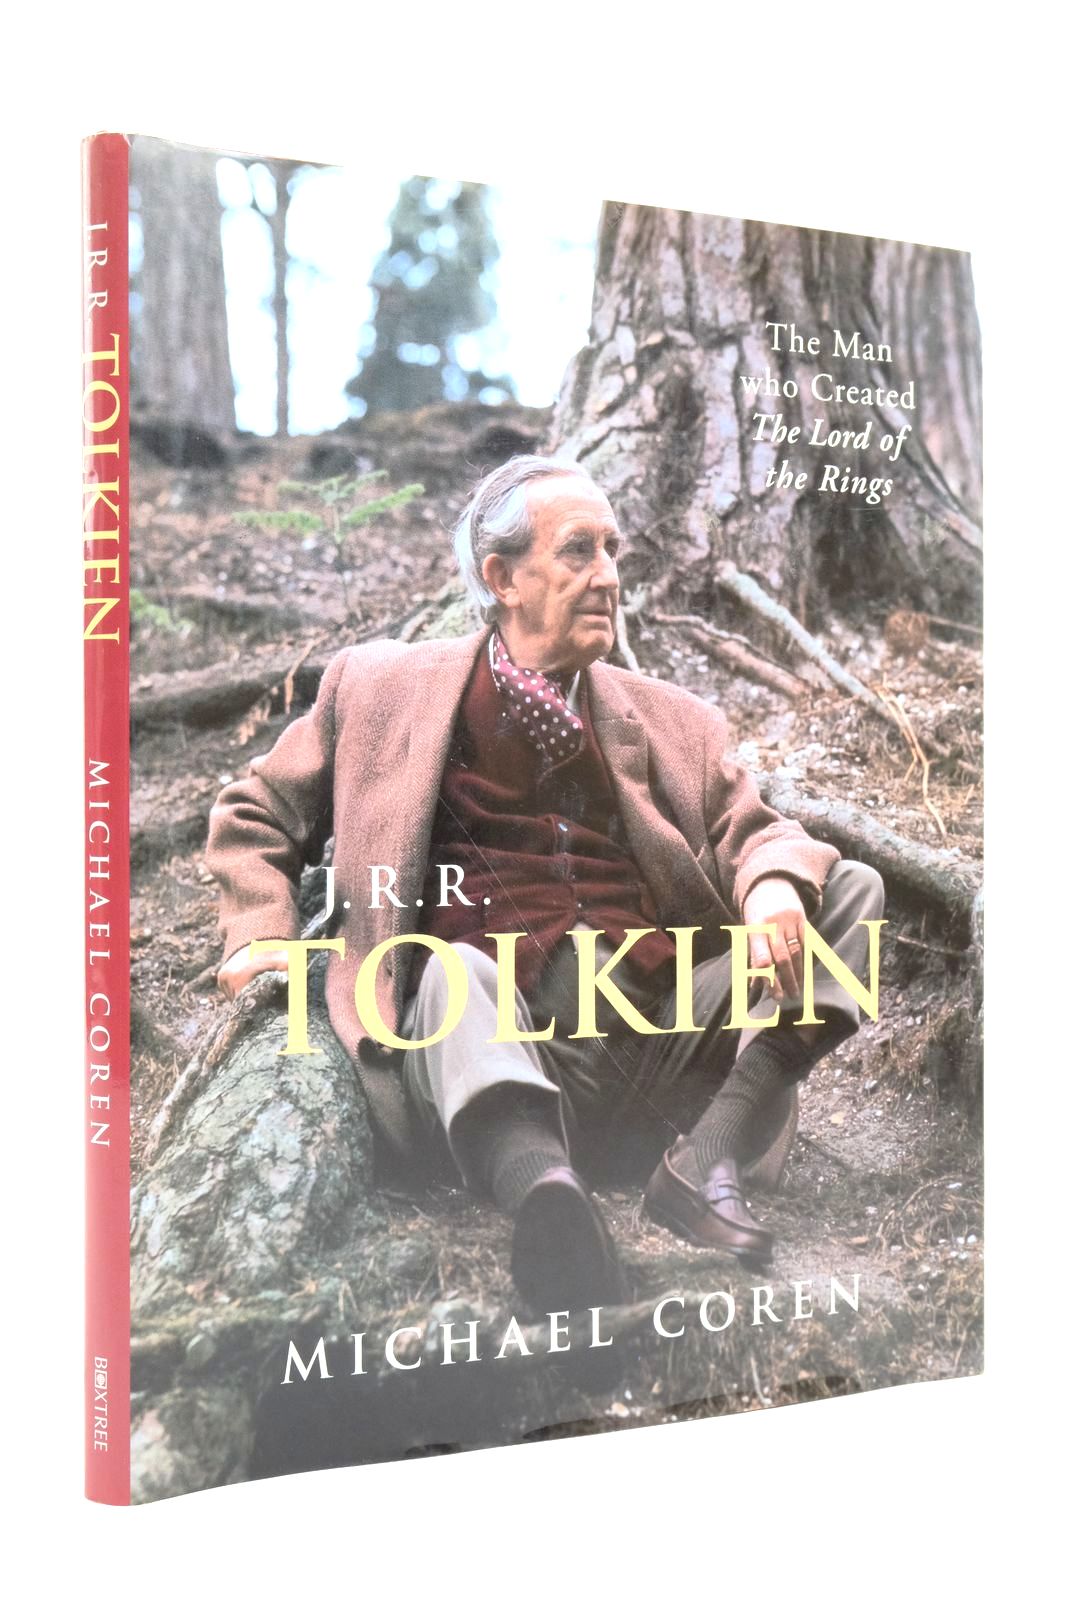 J.R.R. Tolkien The Man Who Created The Lord of The Rings